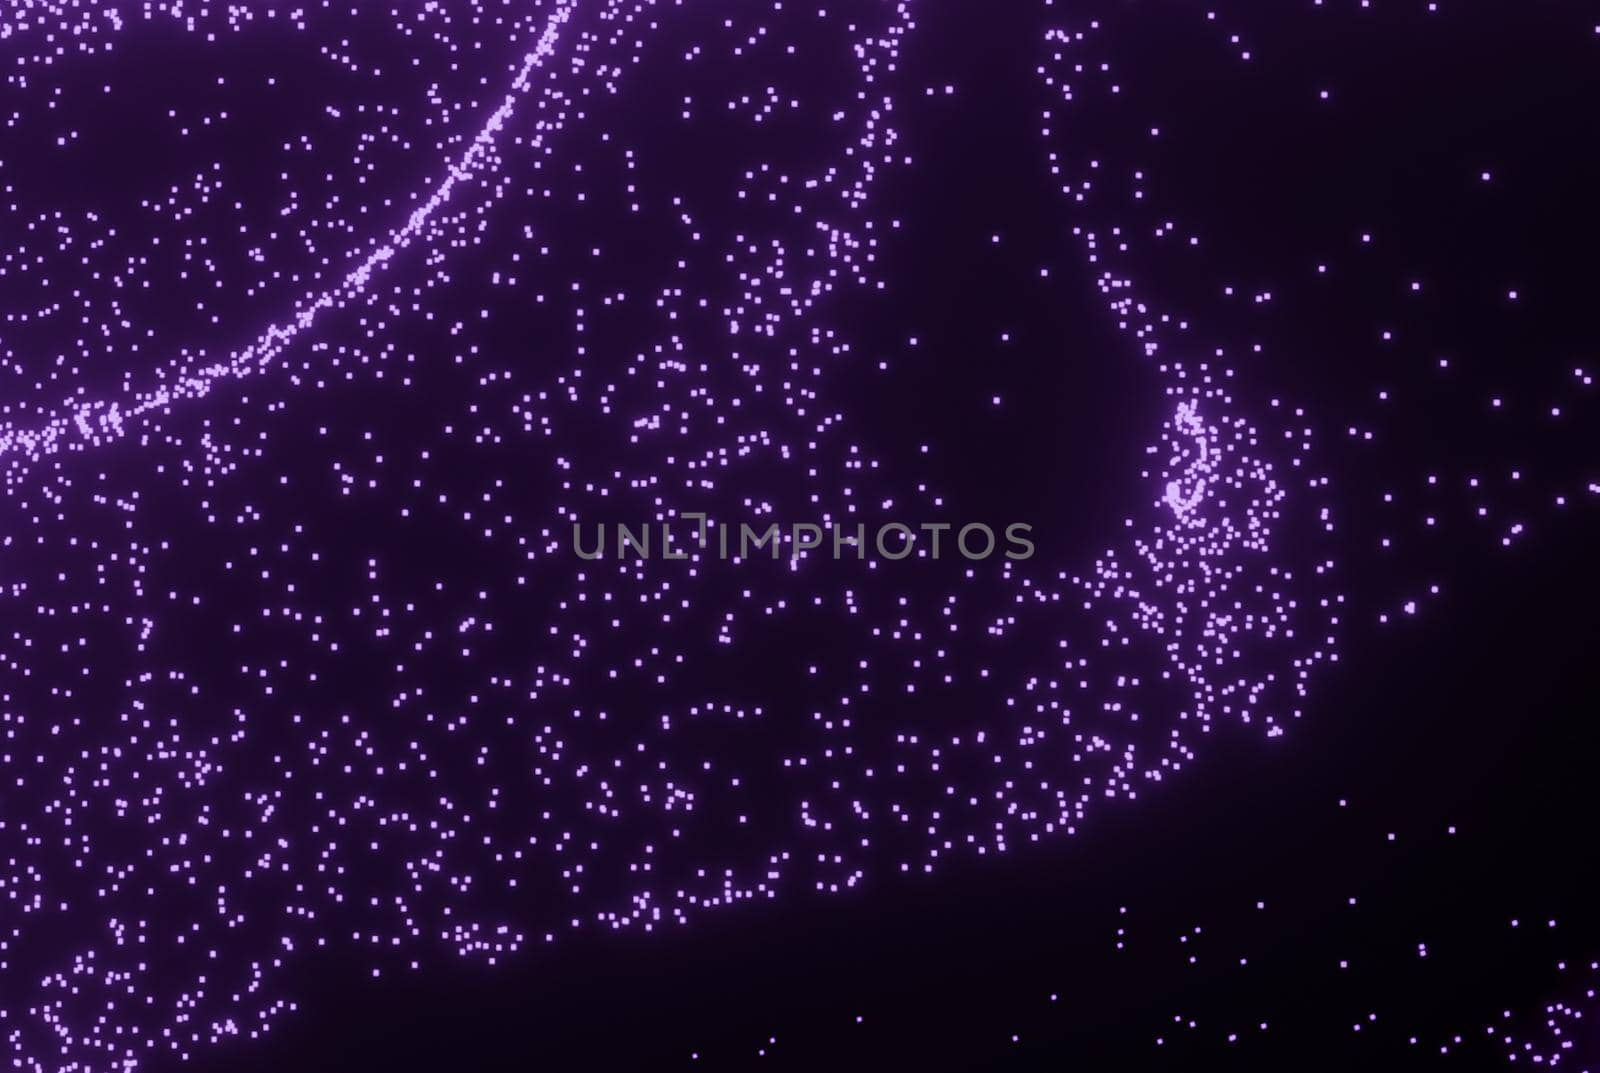 3D Render of many small ultraviolet particles flying on black festive background. Trendy backdrop for your design. Three-dimensional illustration